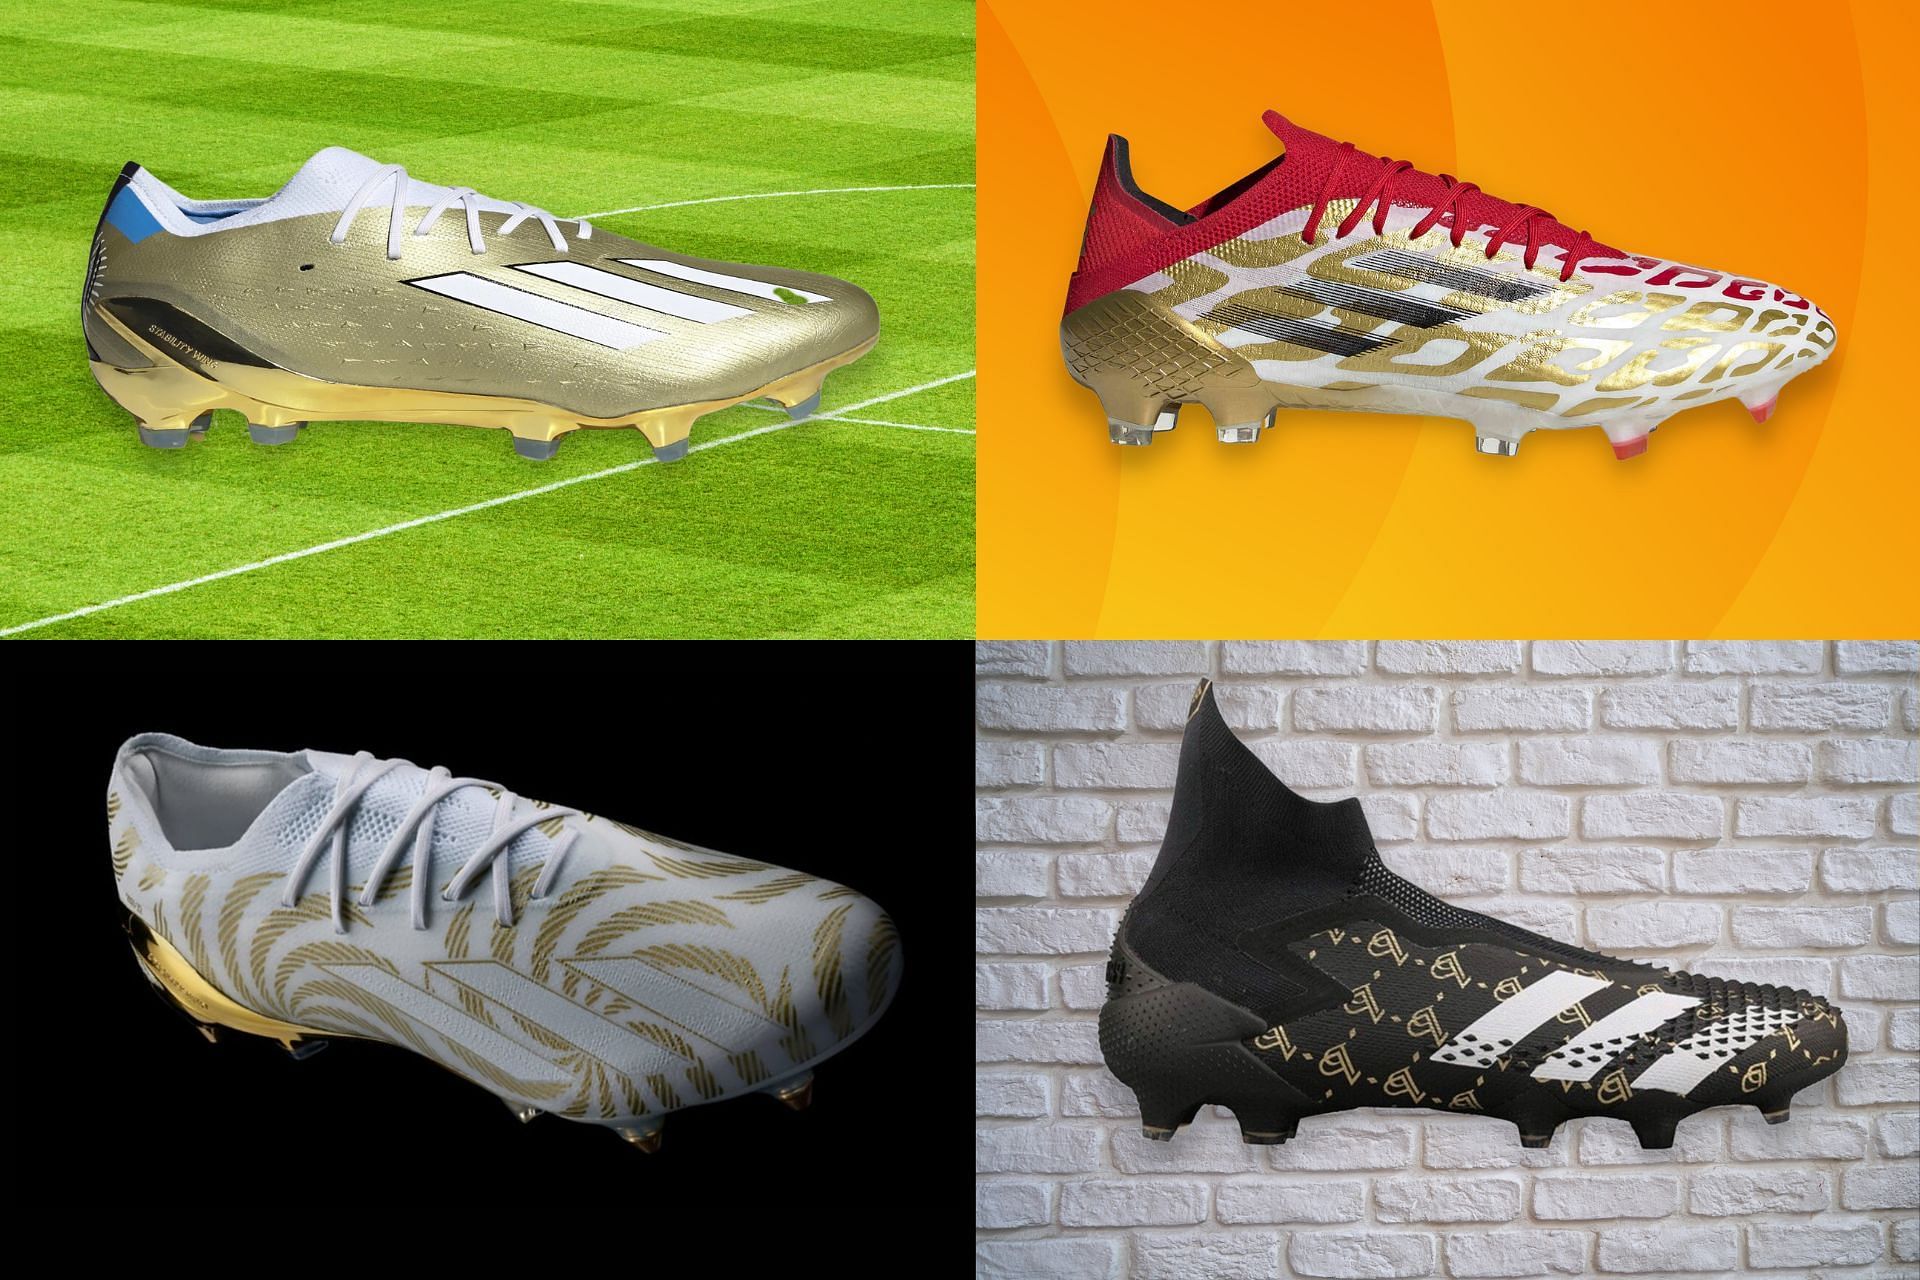 5 Adidas-sponsored players and their best signature boots (Image via Sportskeeda)